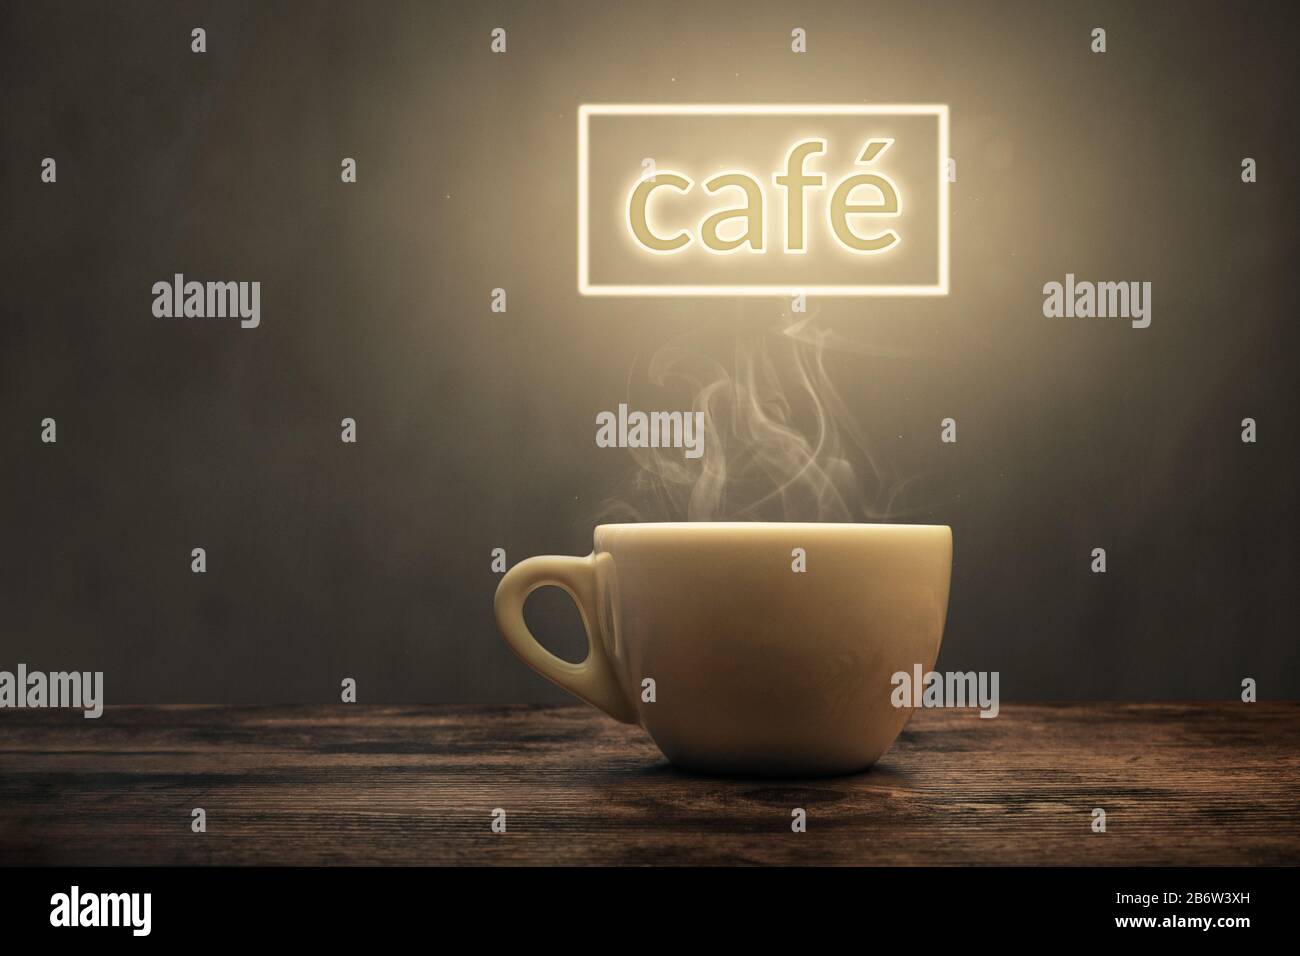 Steaming cup under a glowing café sign Stock Photo